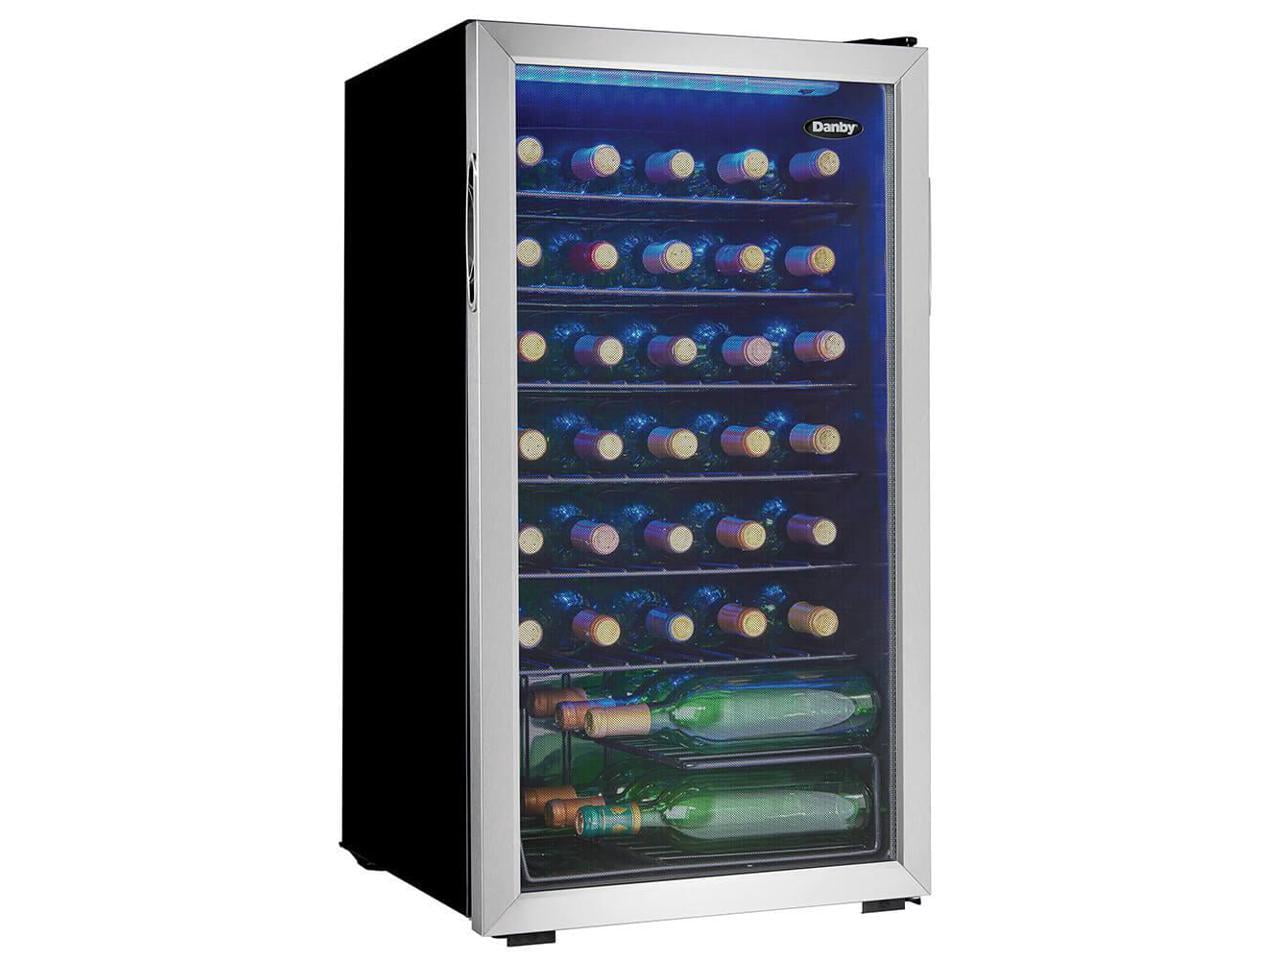 Danby 36 Bottle Free-Standing Wine Cooler in Stainless